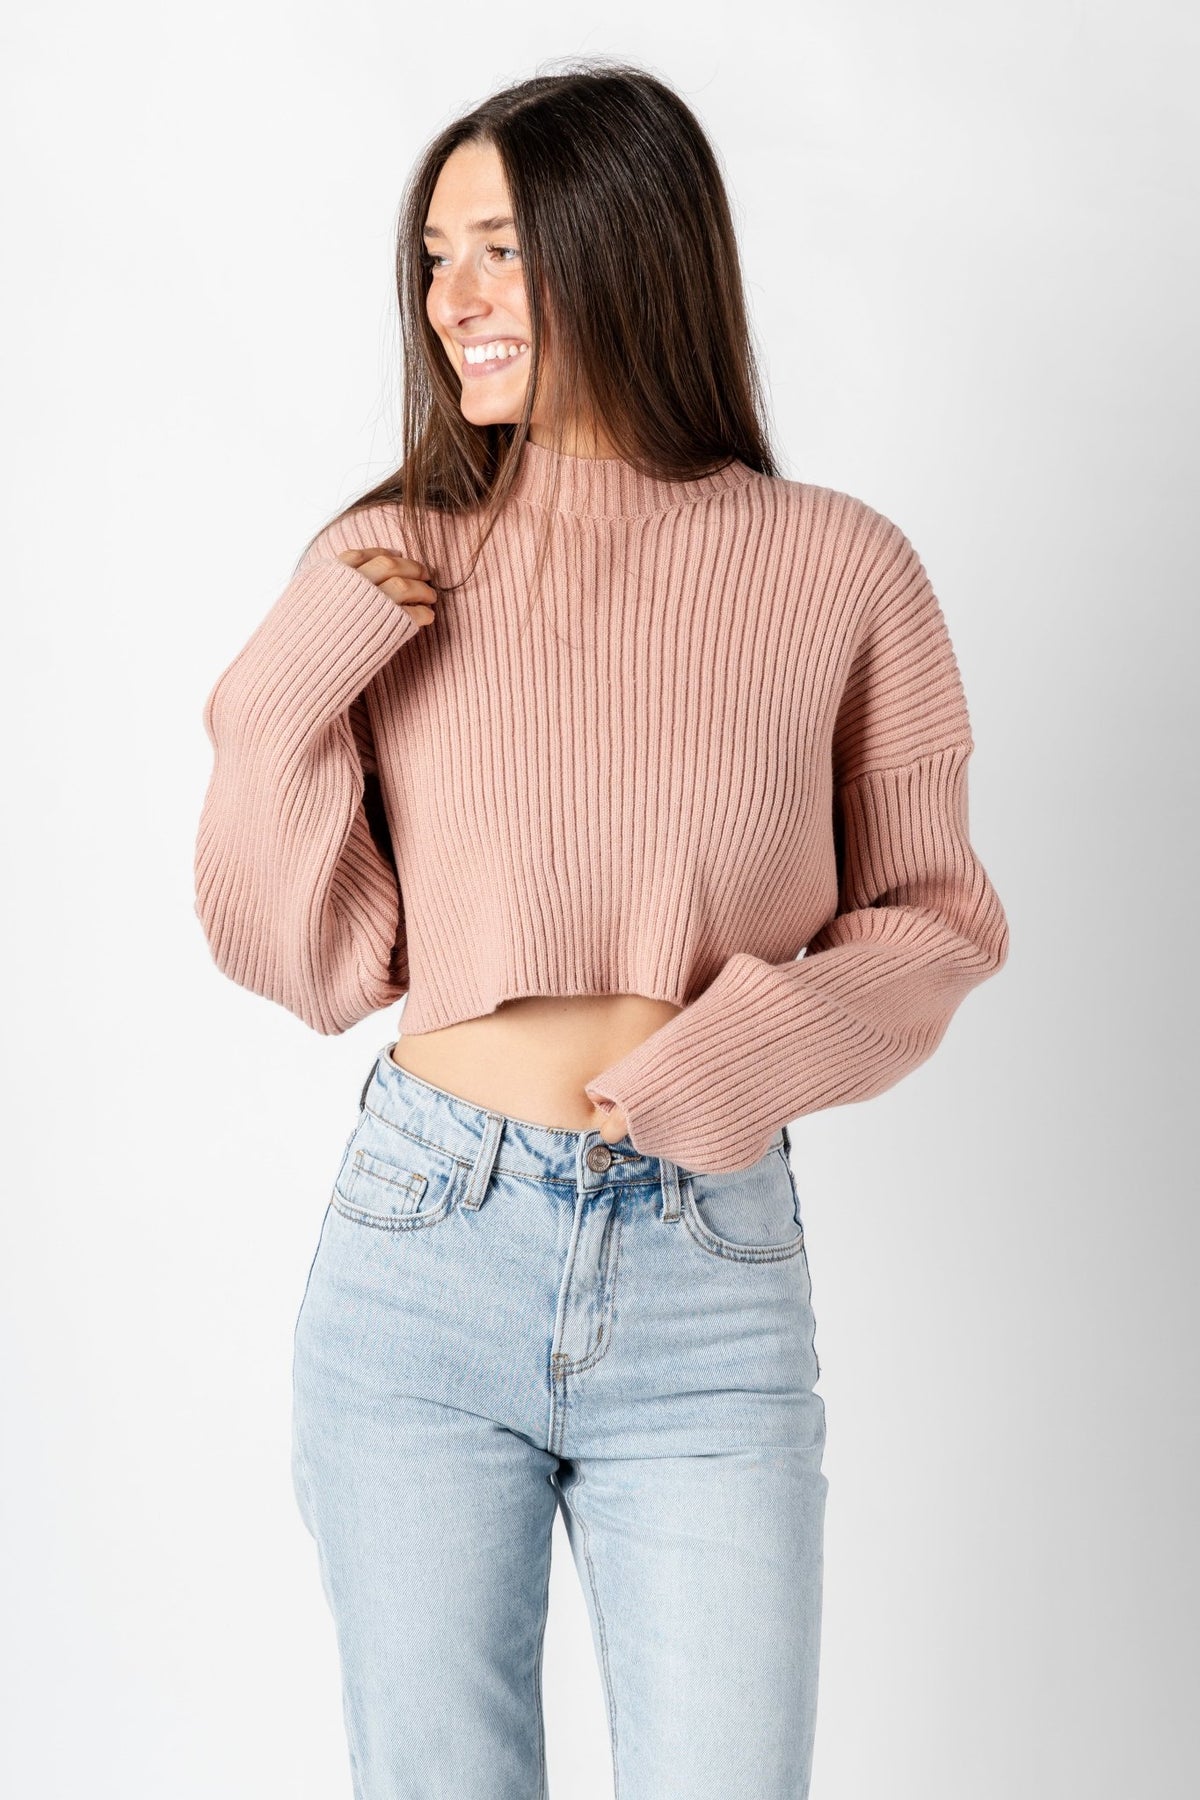 Long sleeve ribbed crop sweater dusty rose – Boutique Sweaters | Fashionable Sweaters at Lush Fashion Lounge Boutique in Oklahoma City